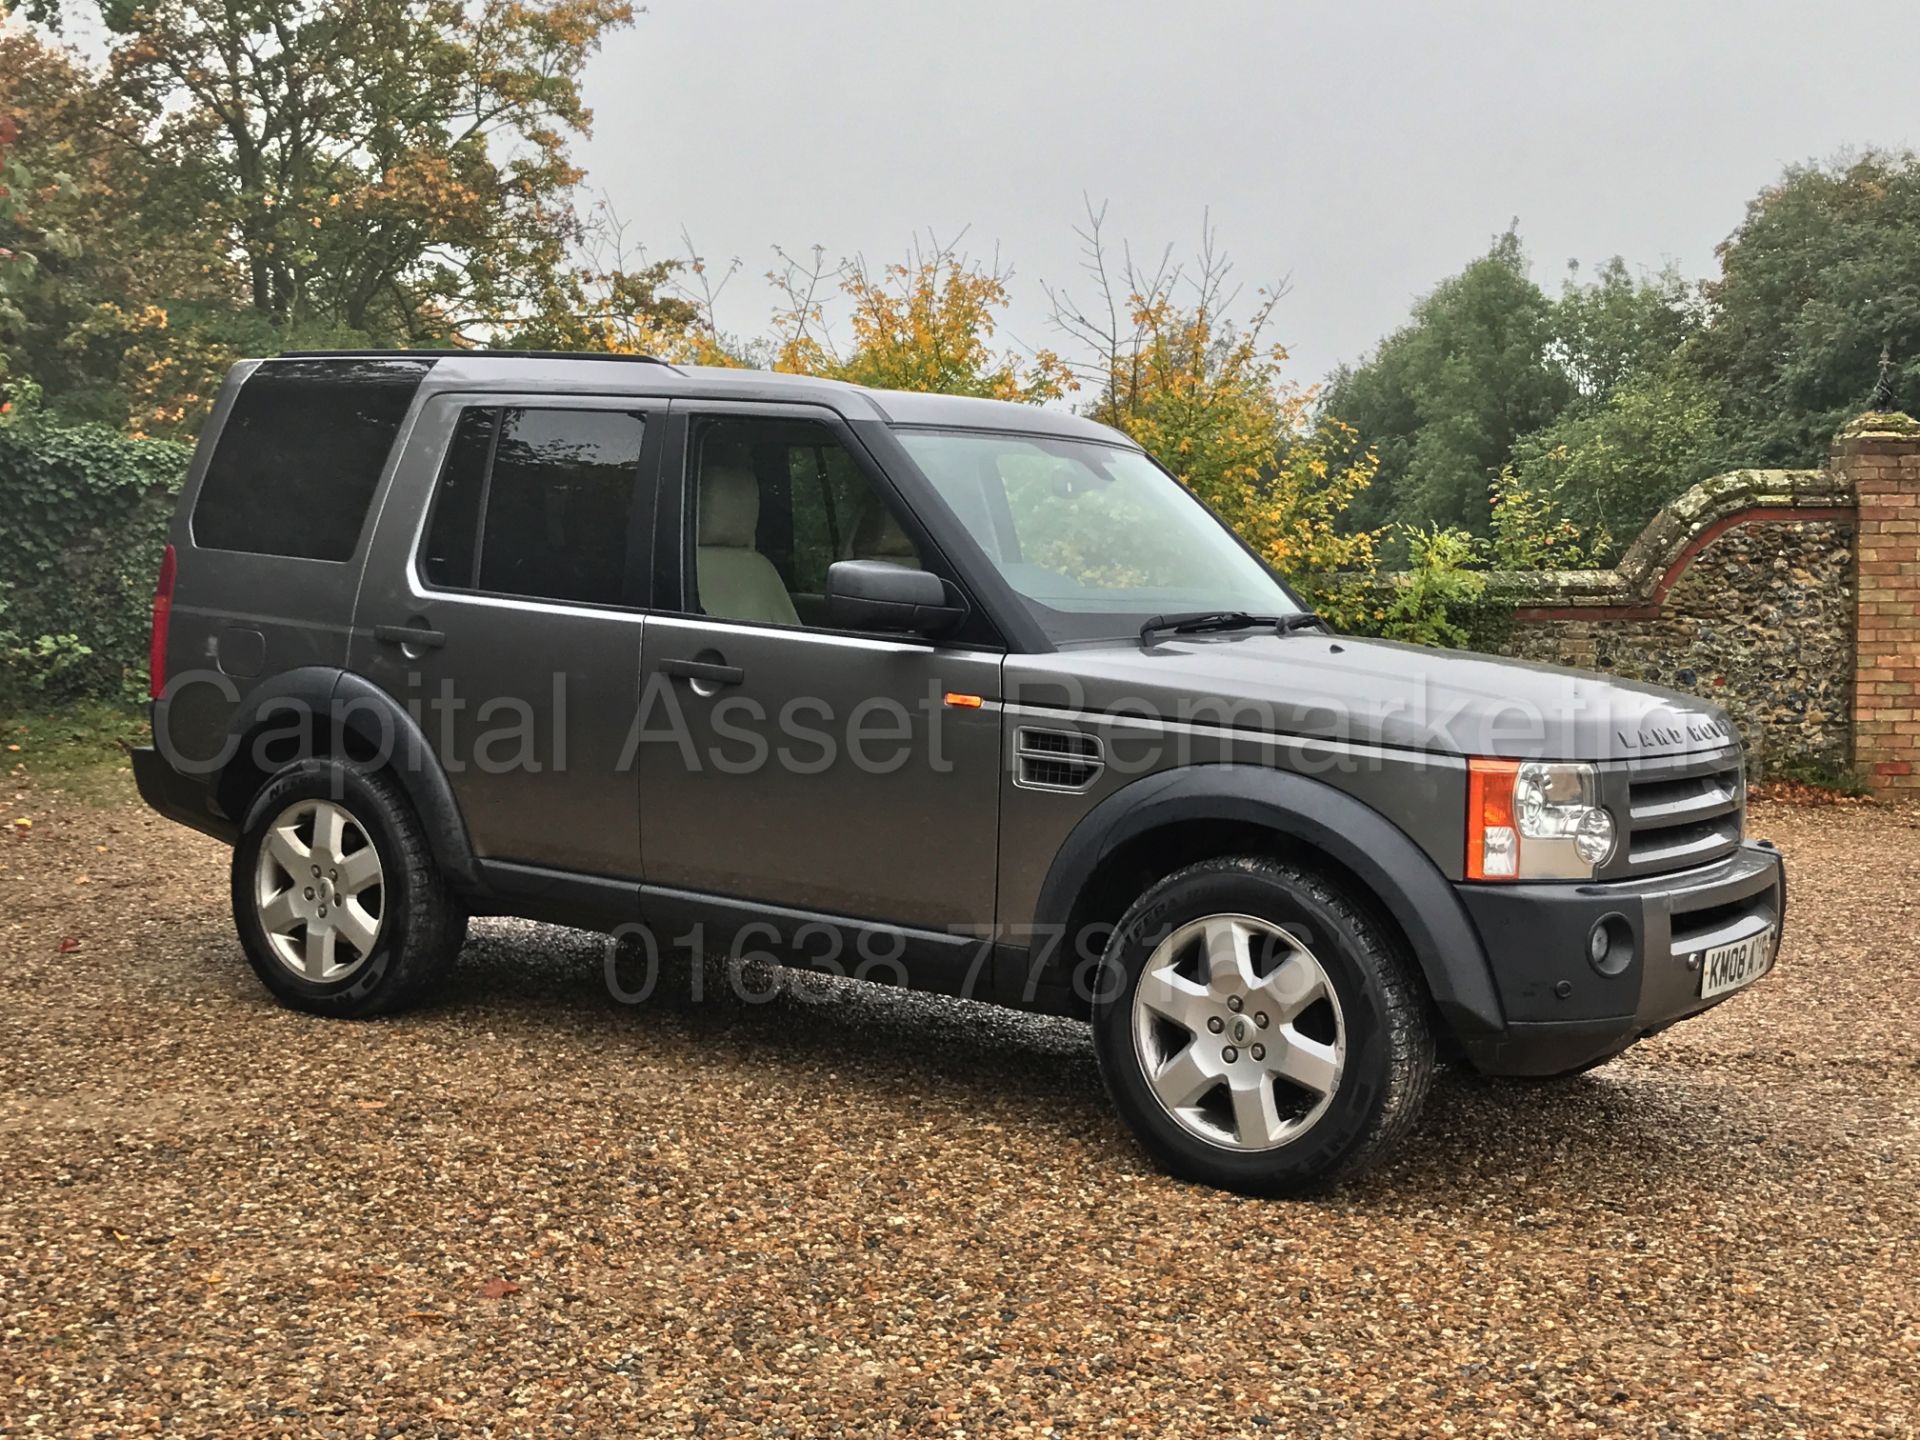 LAND ROVER DISCOVERY 3 HSE (2008 - 08 REG) 'TDV6 - AUTO - LEATHER - SAT NAV - 7 SEATER' *1 OWNER* - Image 10 of 37